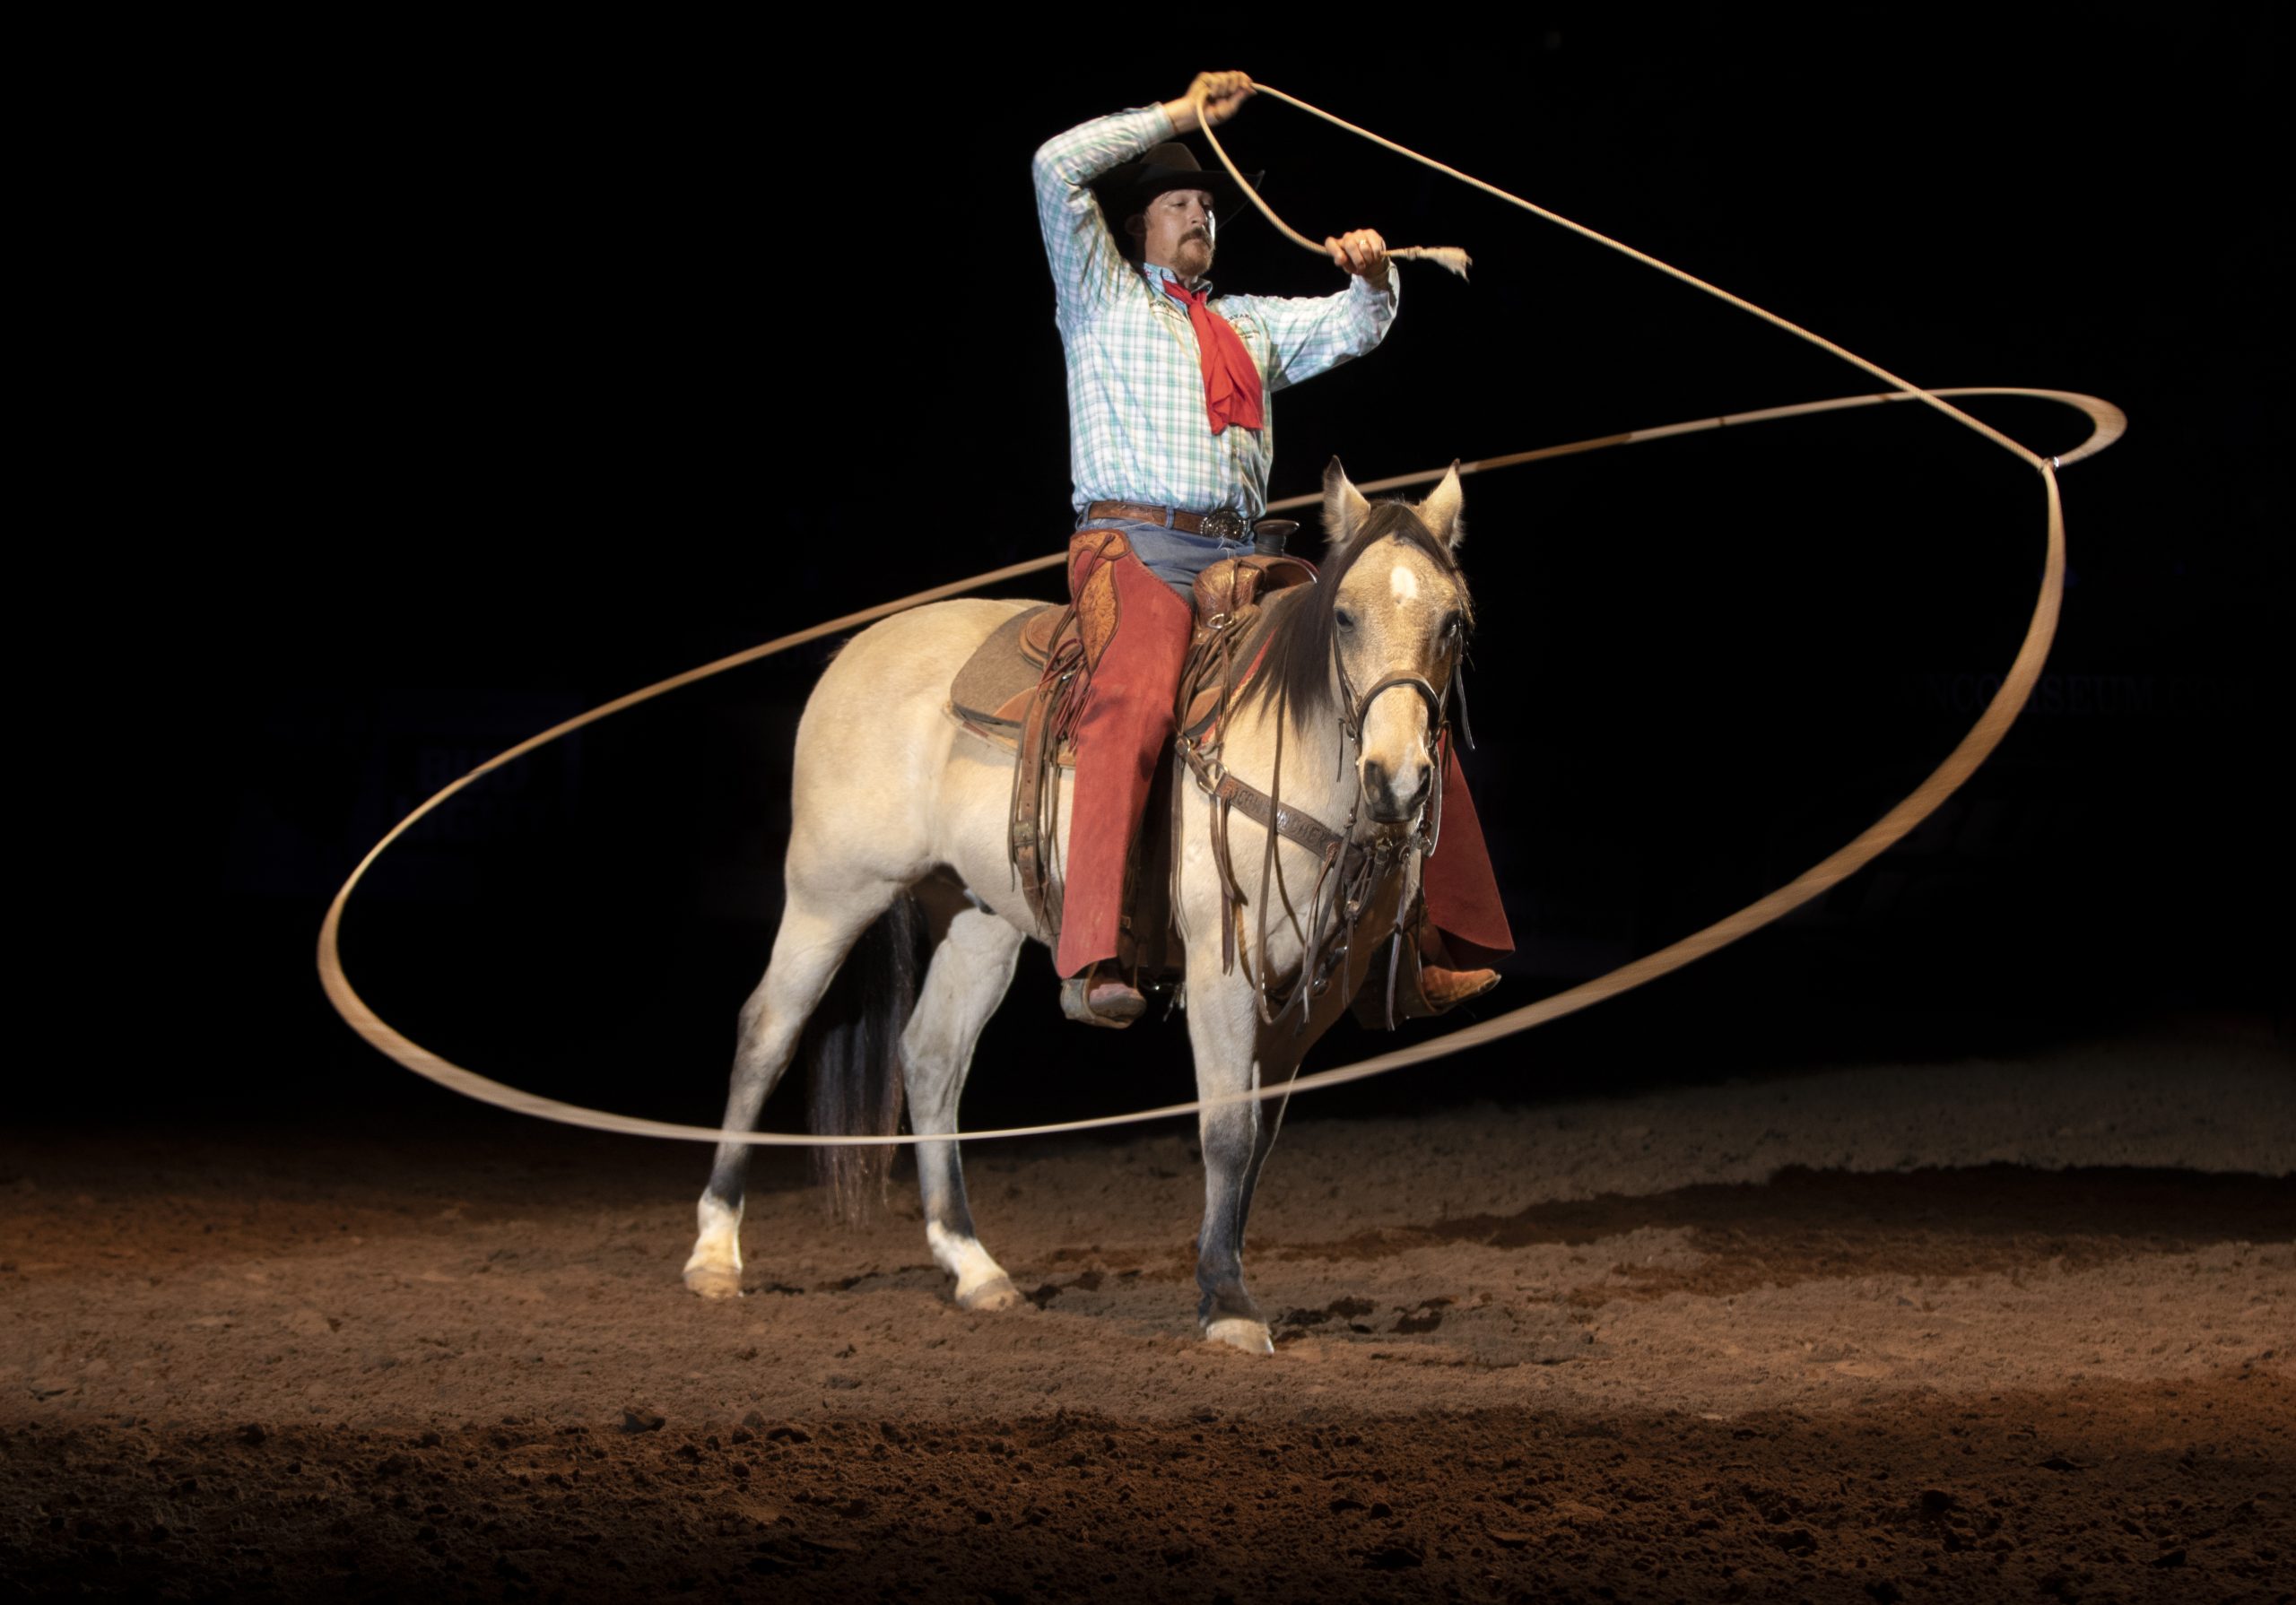 Photograph of a cowboy trick roper on a horse.